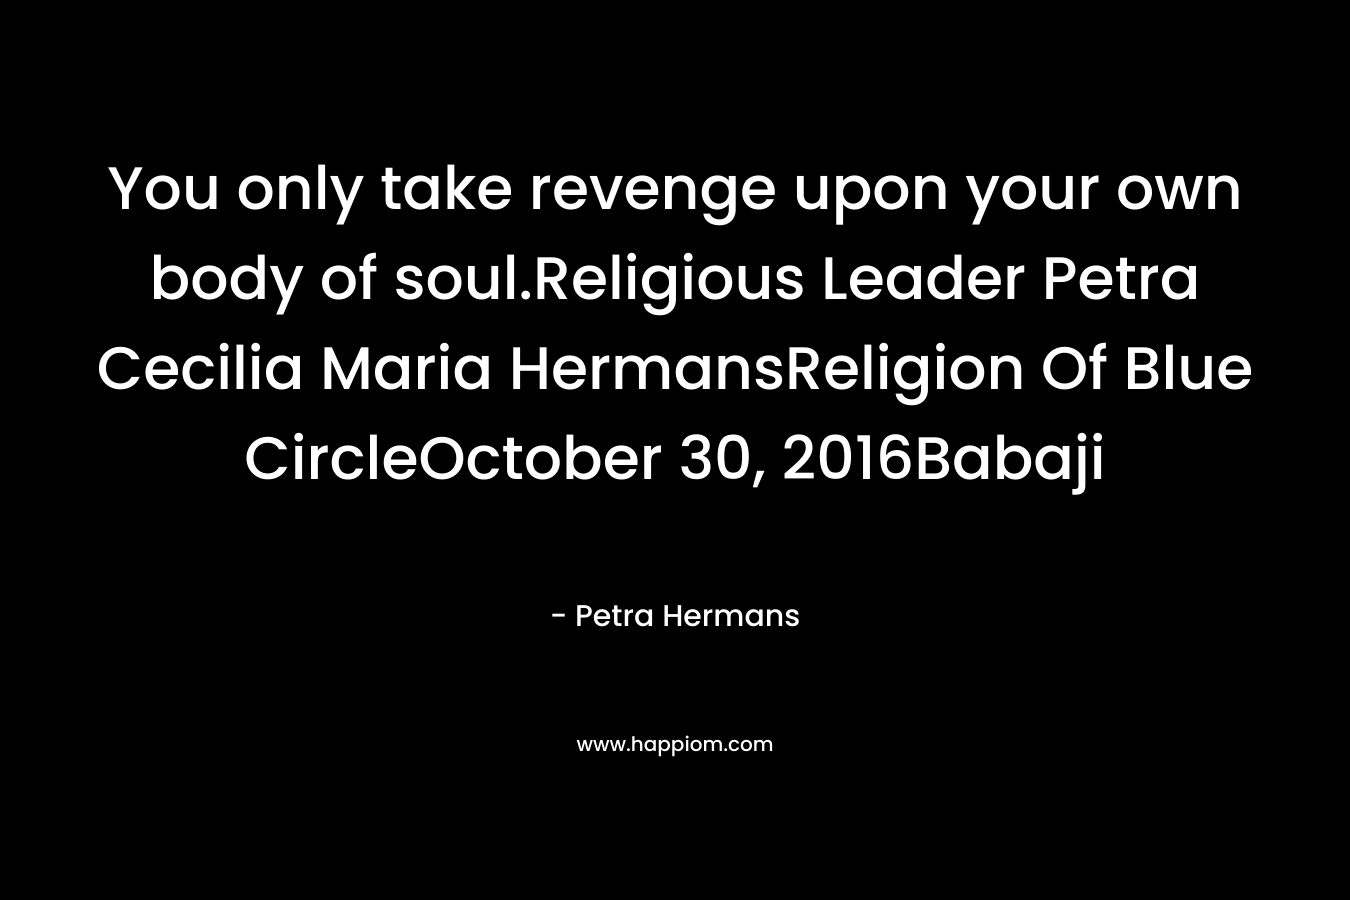 You only take revenge upon your own body of soul.Religious Leader Petra Cecilia Maria HermansReligion Of Blue CircleOctober 30, 2016Babaji – Petra Hermans